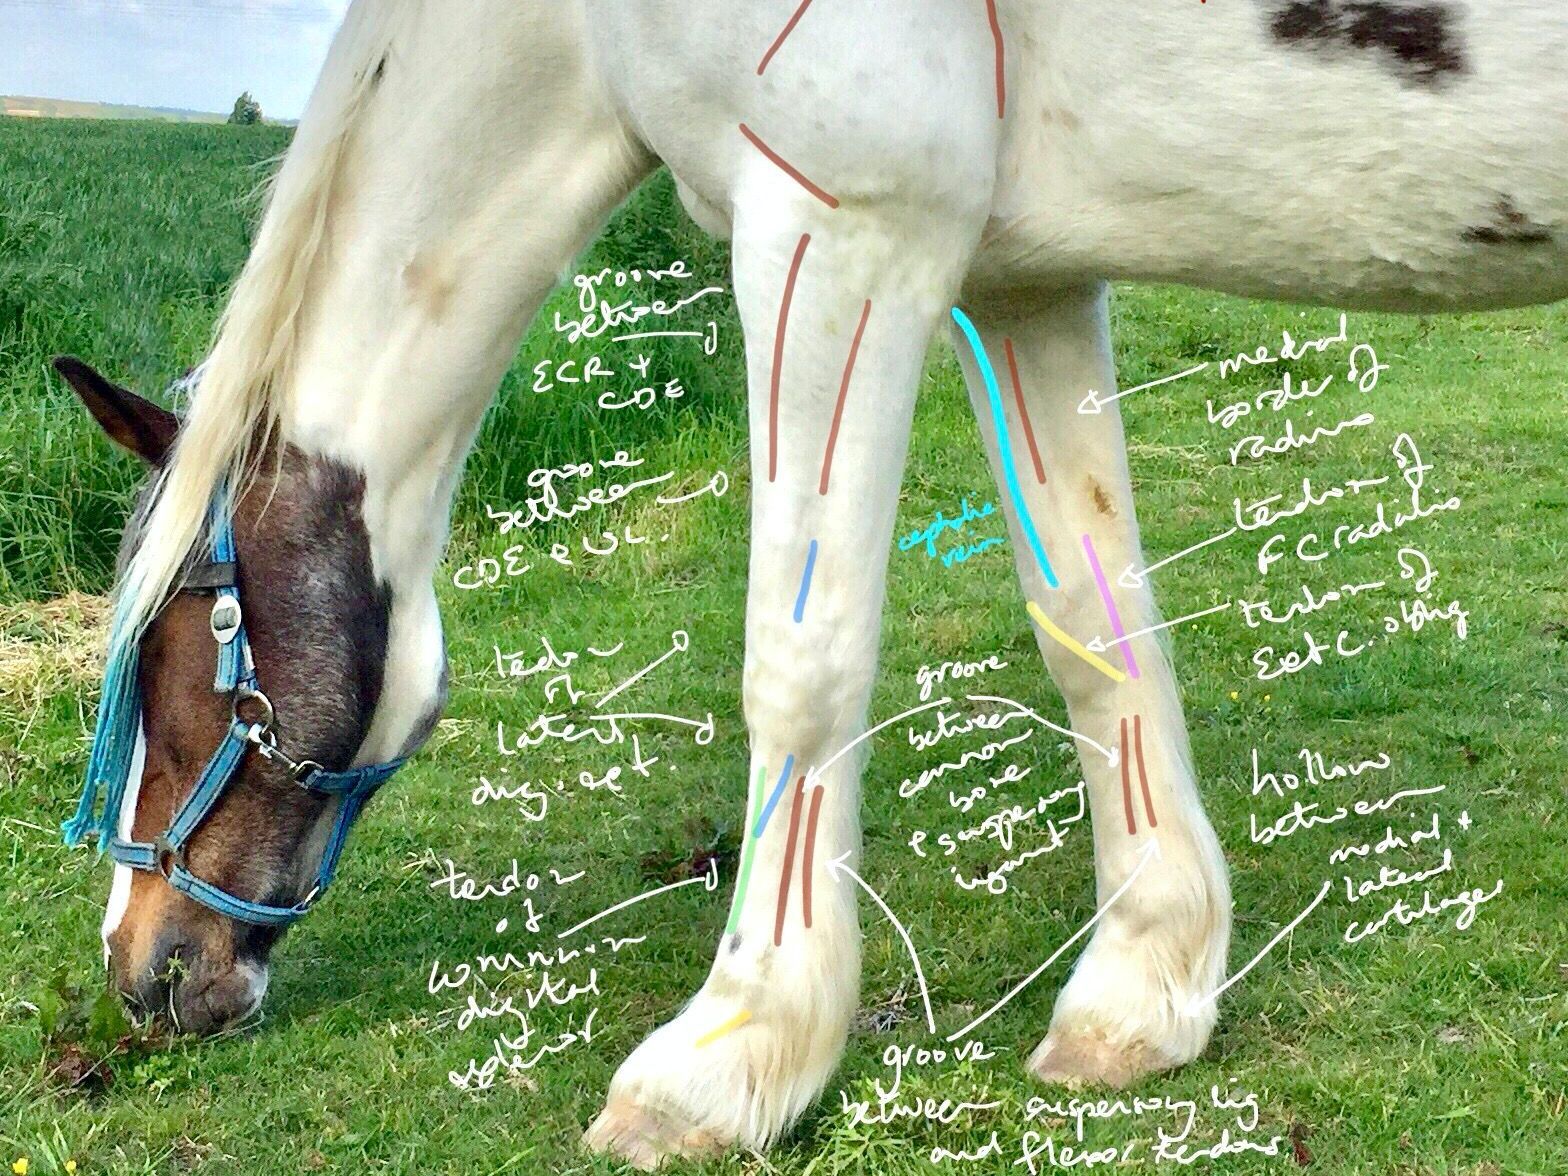 Equine anatomy, surface palpation of landmarks of the horse's foreleg.